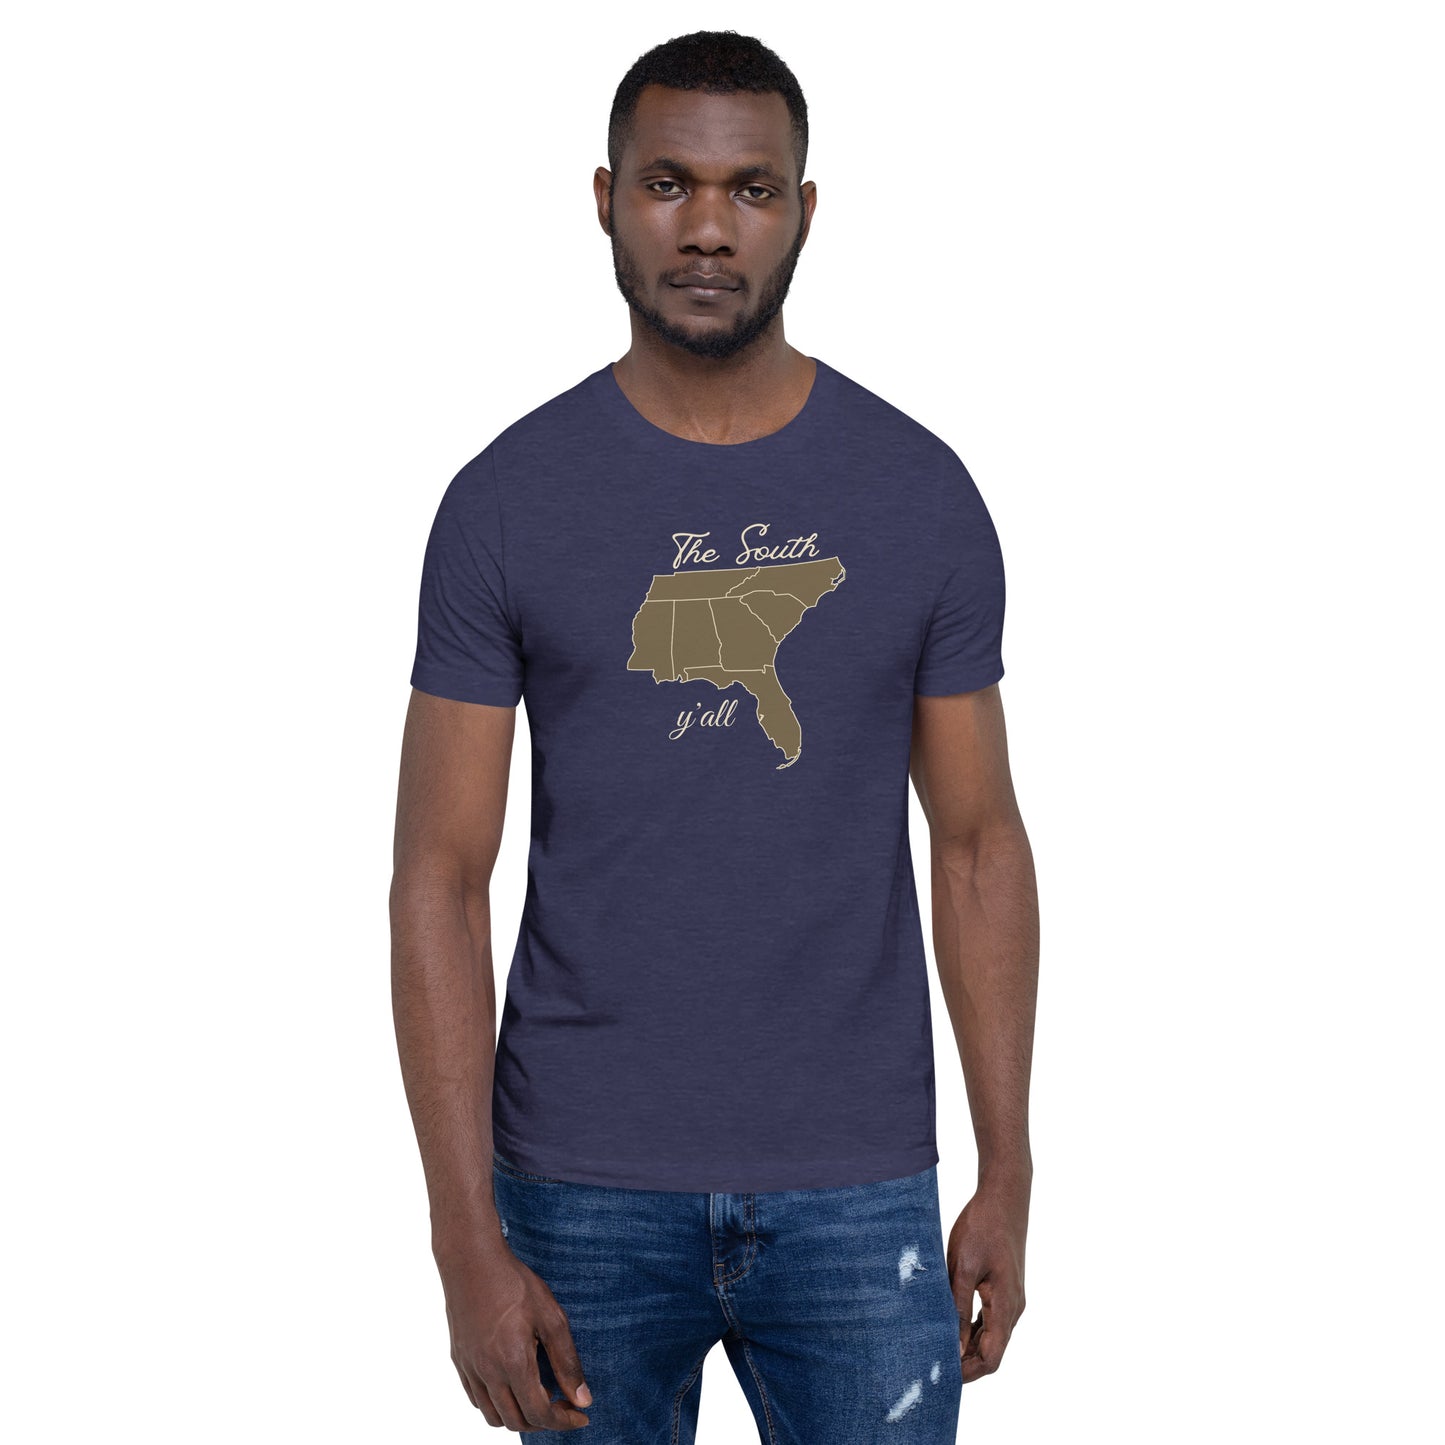 The South Y'all / T-Shirt